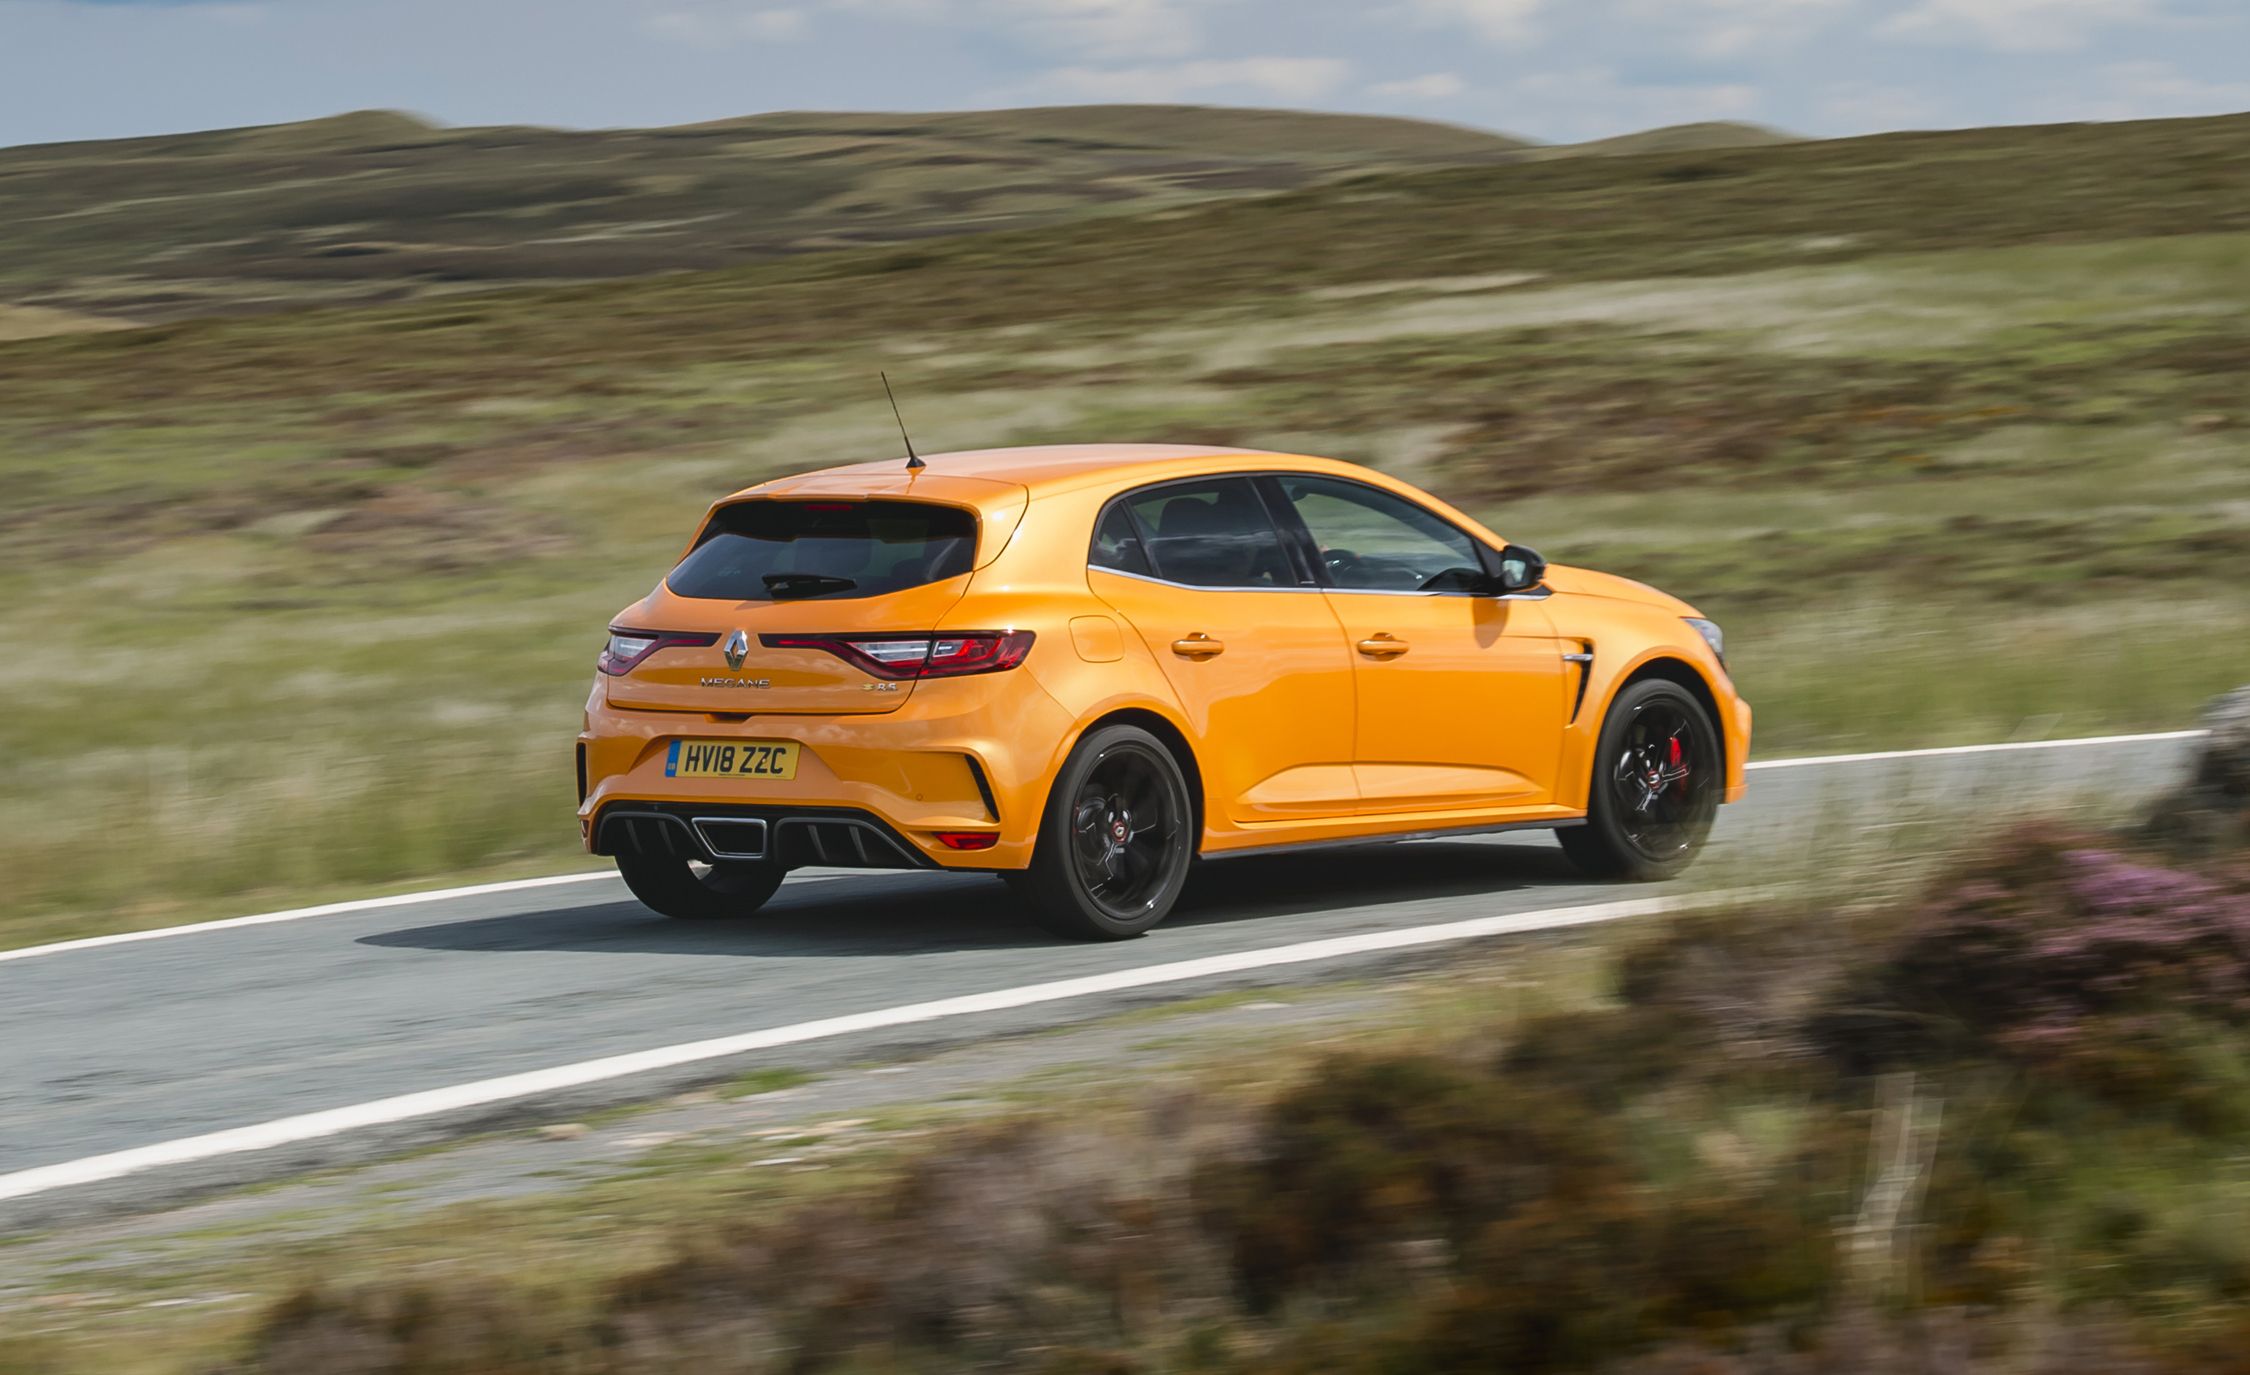 The Renault Mégane R.S. - A French Hot Hatch